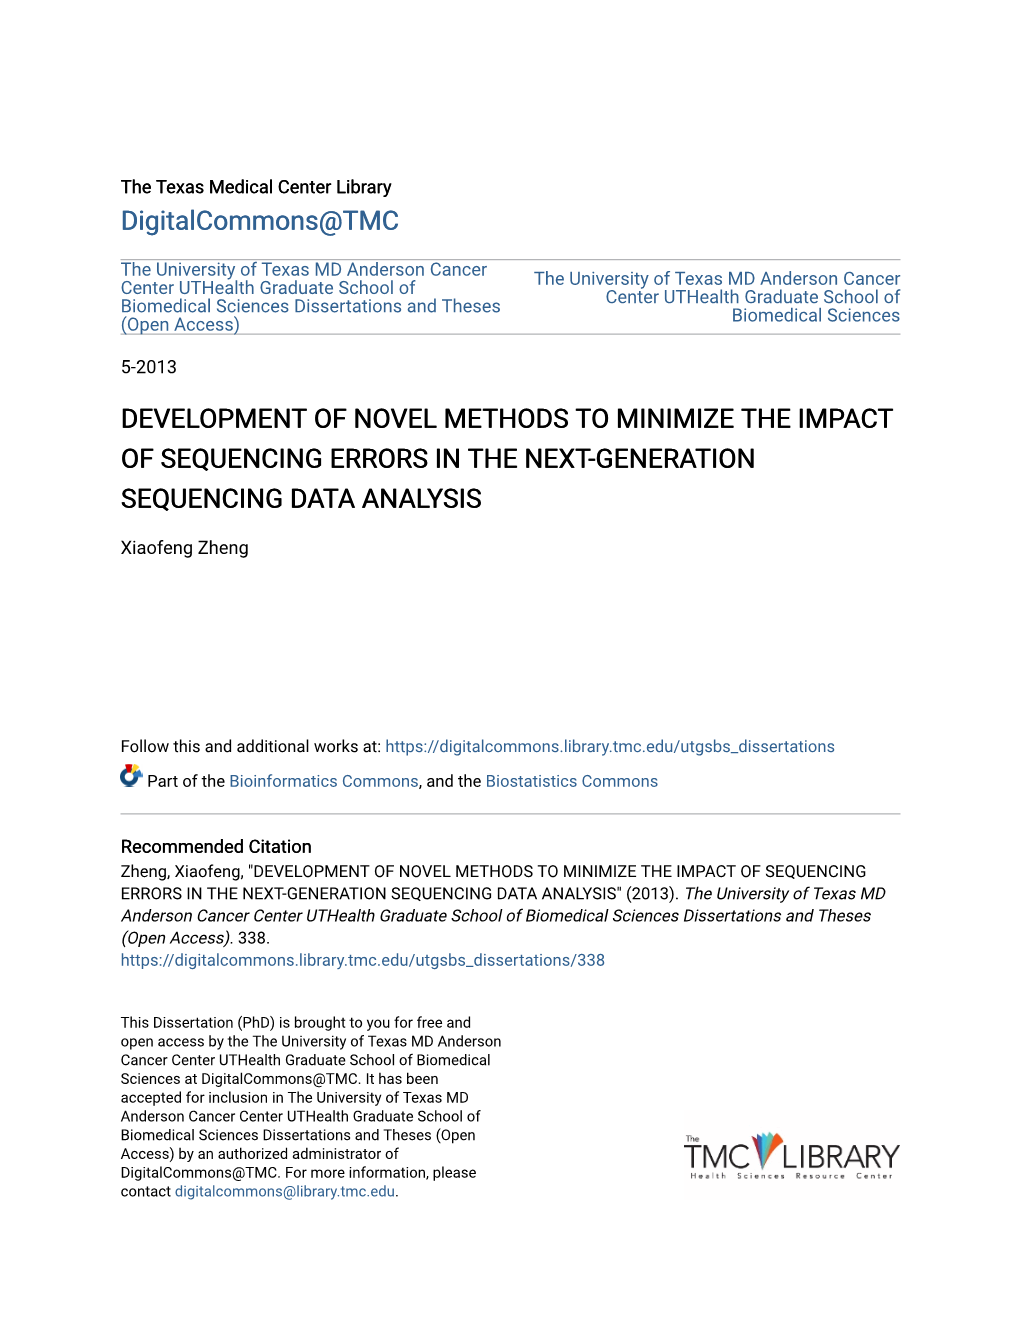 Development of Novel Methods to Minimize the Impact of Sequencing Errors in the Next-Generation Sequencing Data Analysis